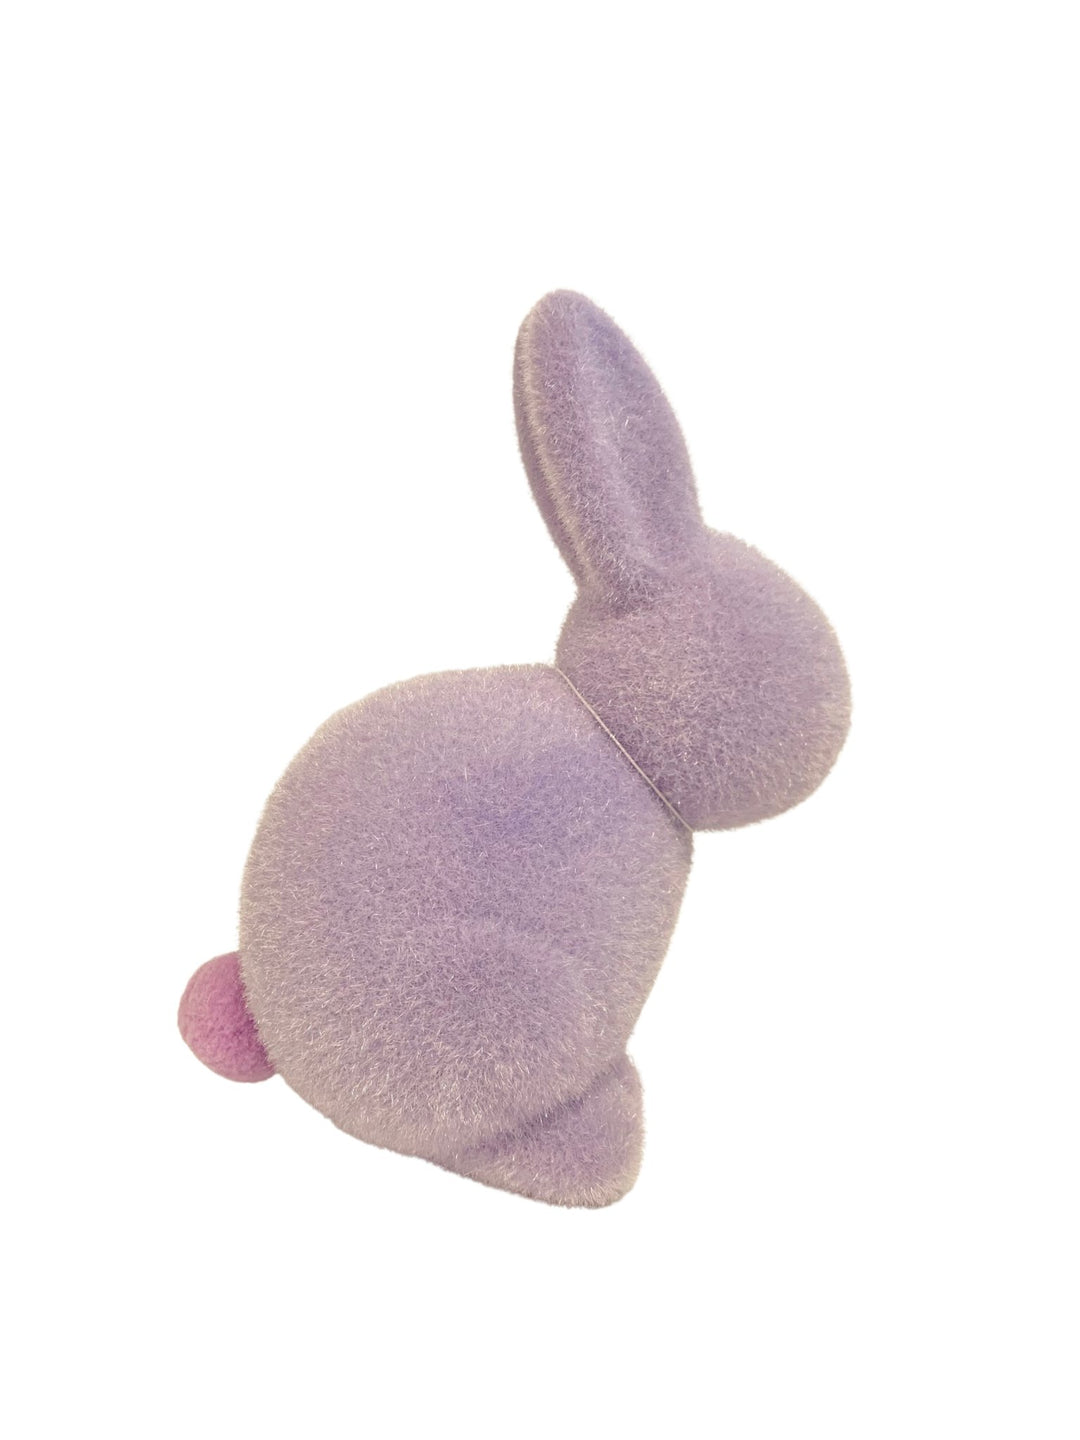 Large Flocked Seated Bunny - #Perch#